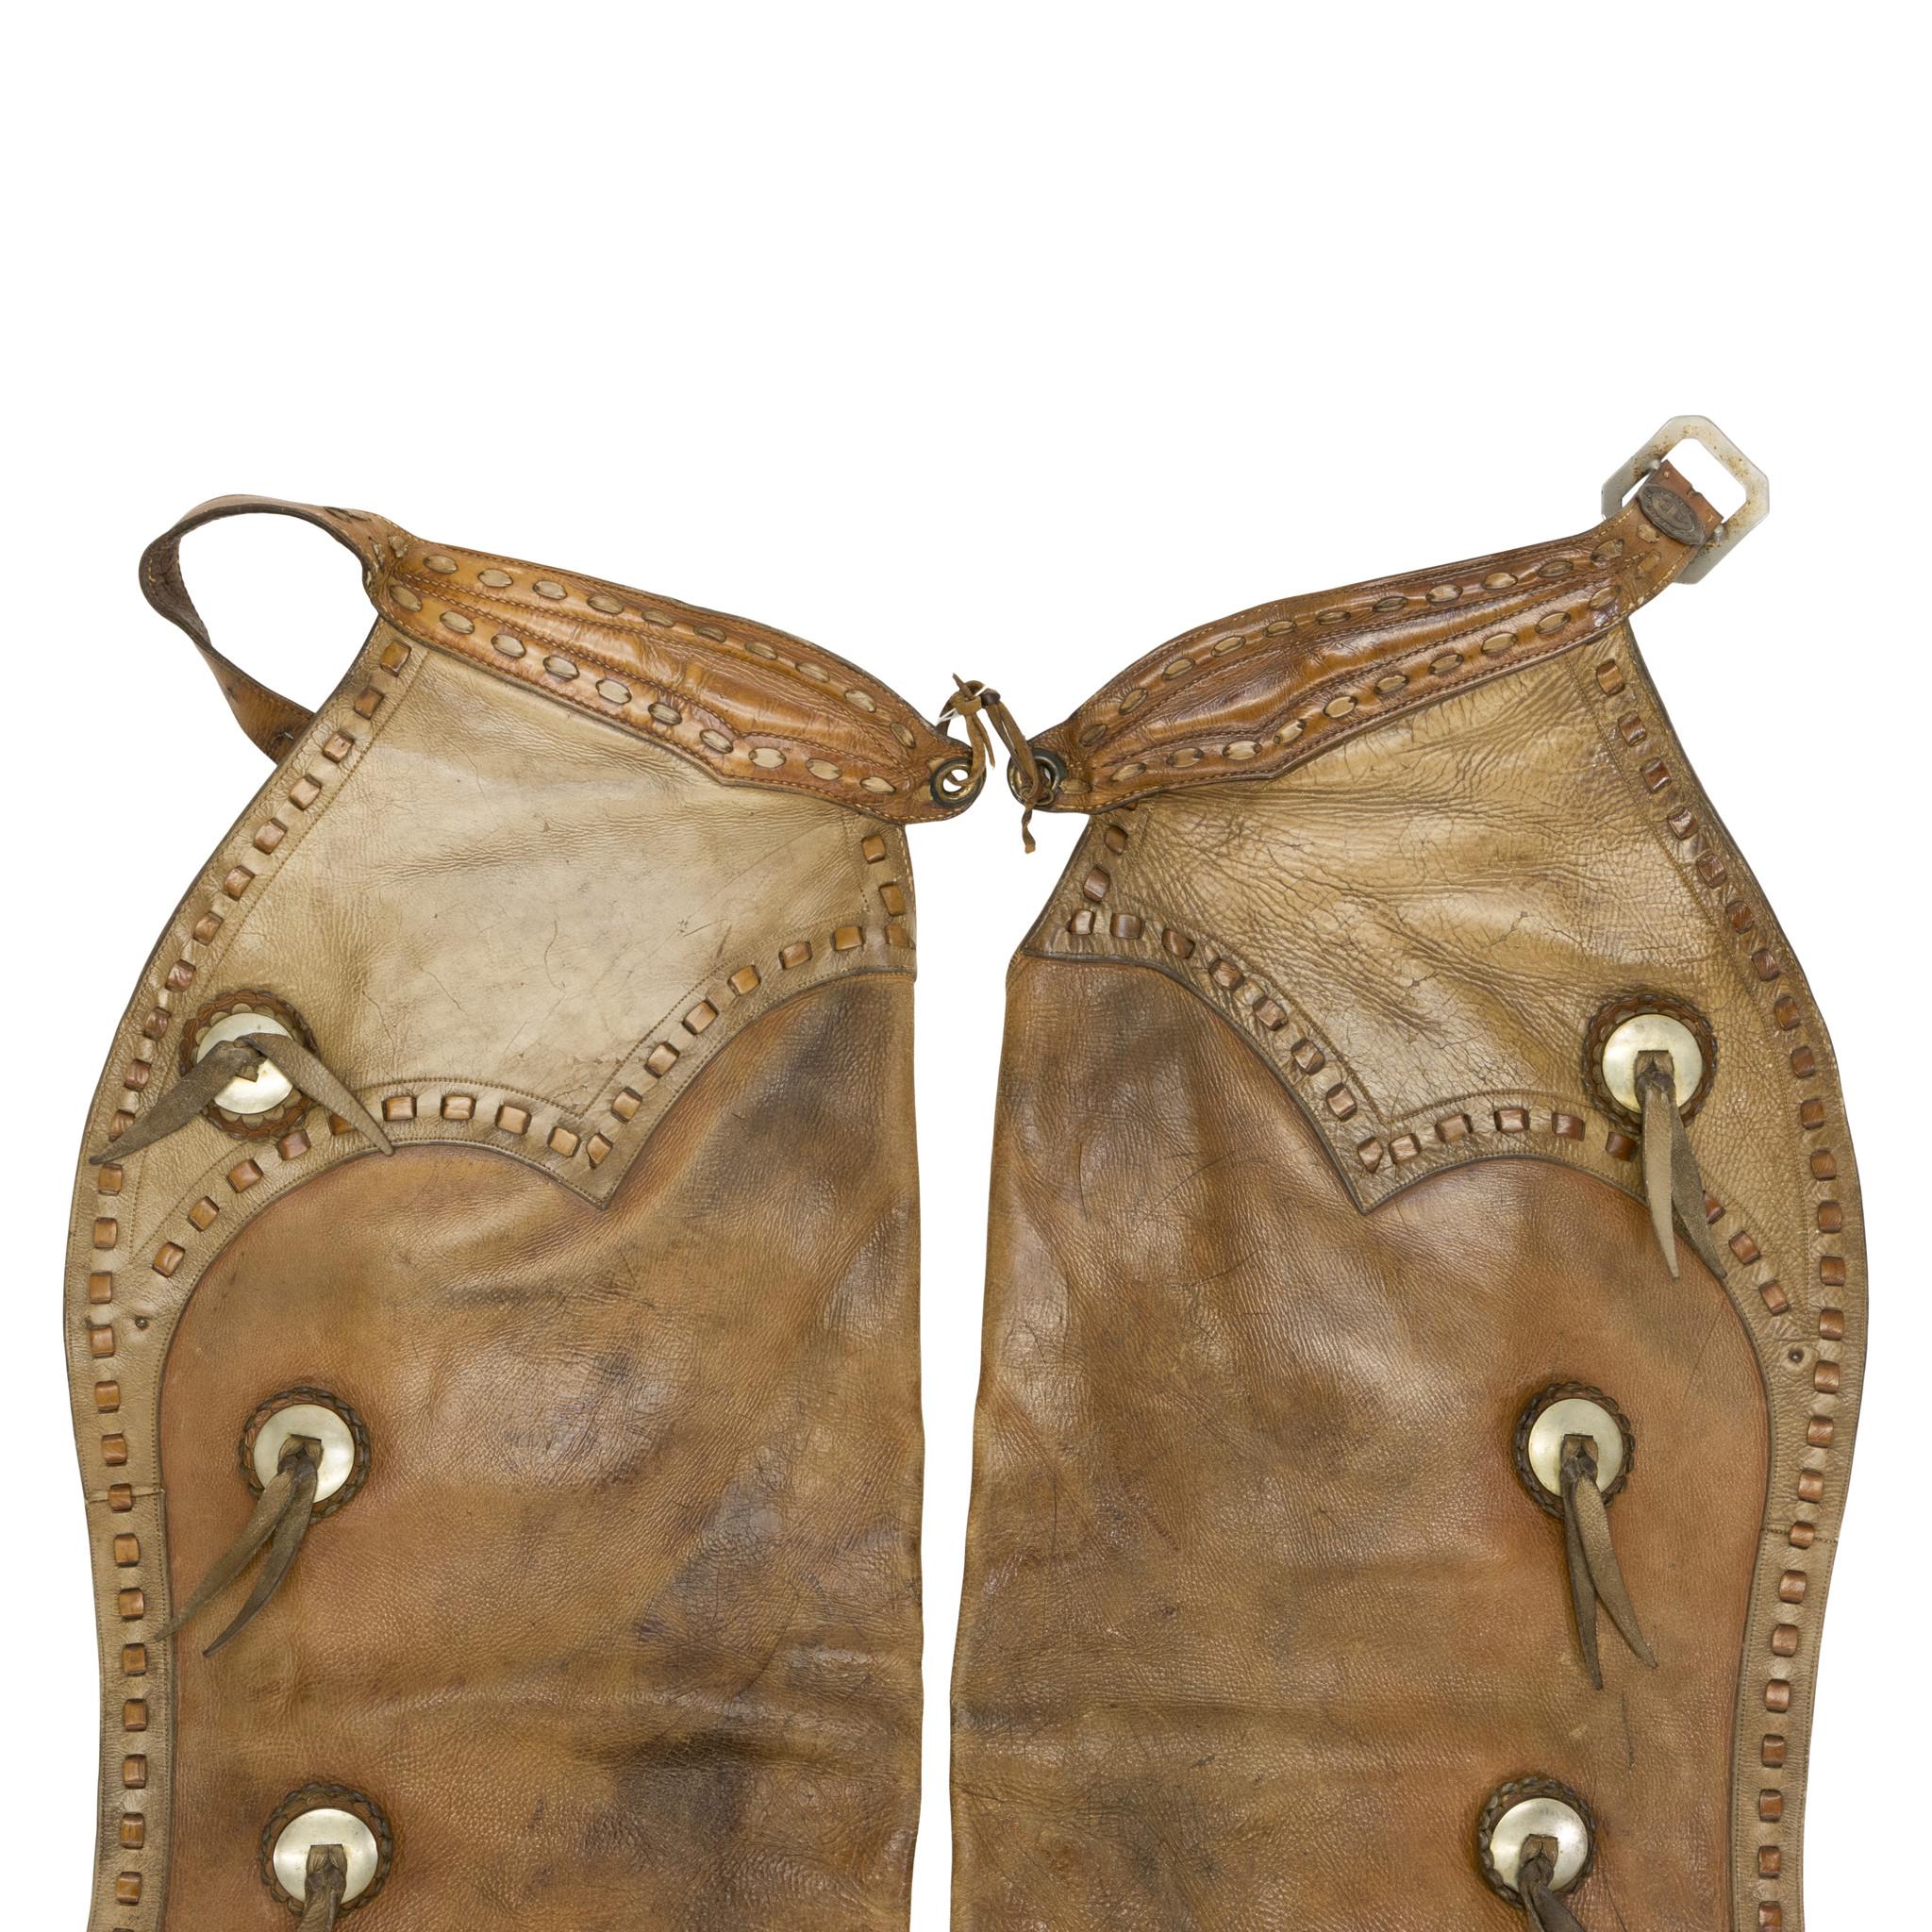 Vintage leather Heiser batwing chaps with buck stitched edging and conchos. Nice patina to leather and nice light coloring. In good condition for use or display in a Western or Southwestern style home. Size: 38